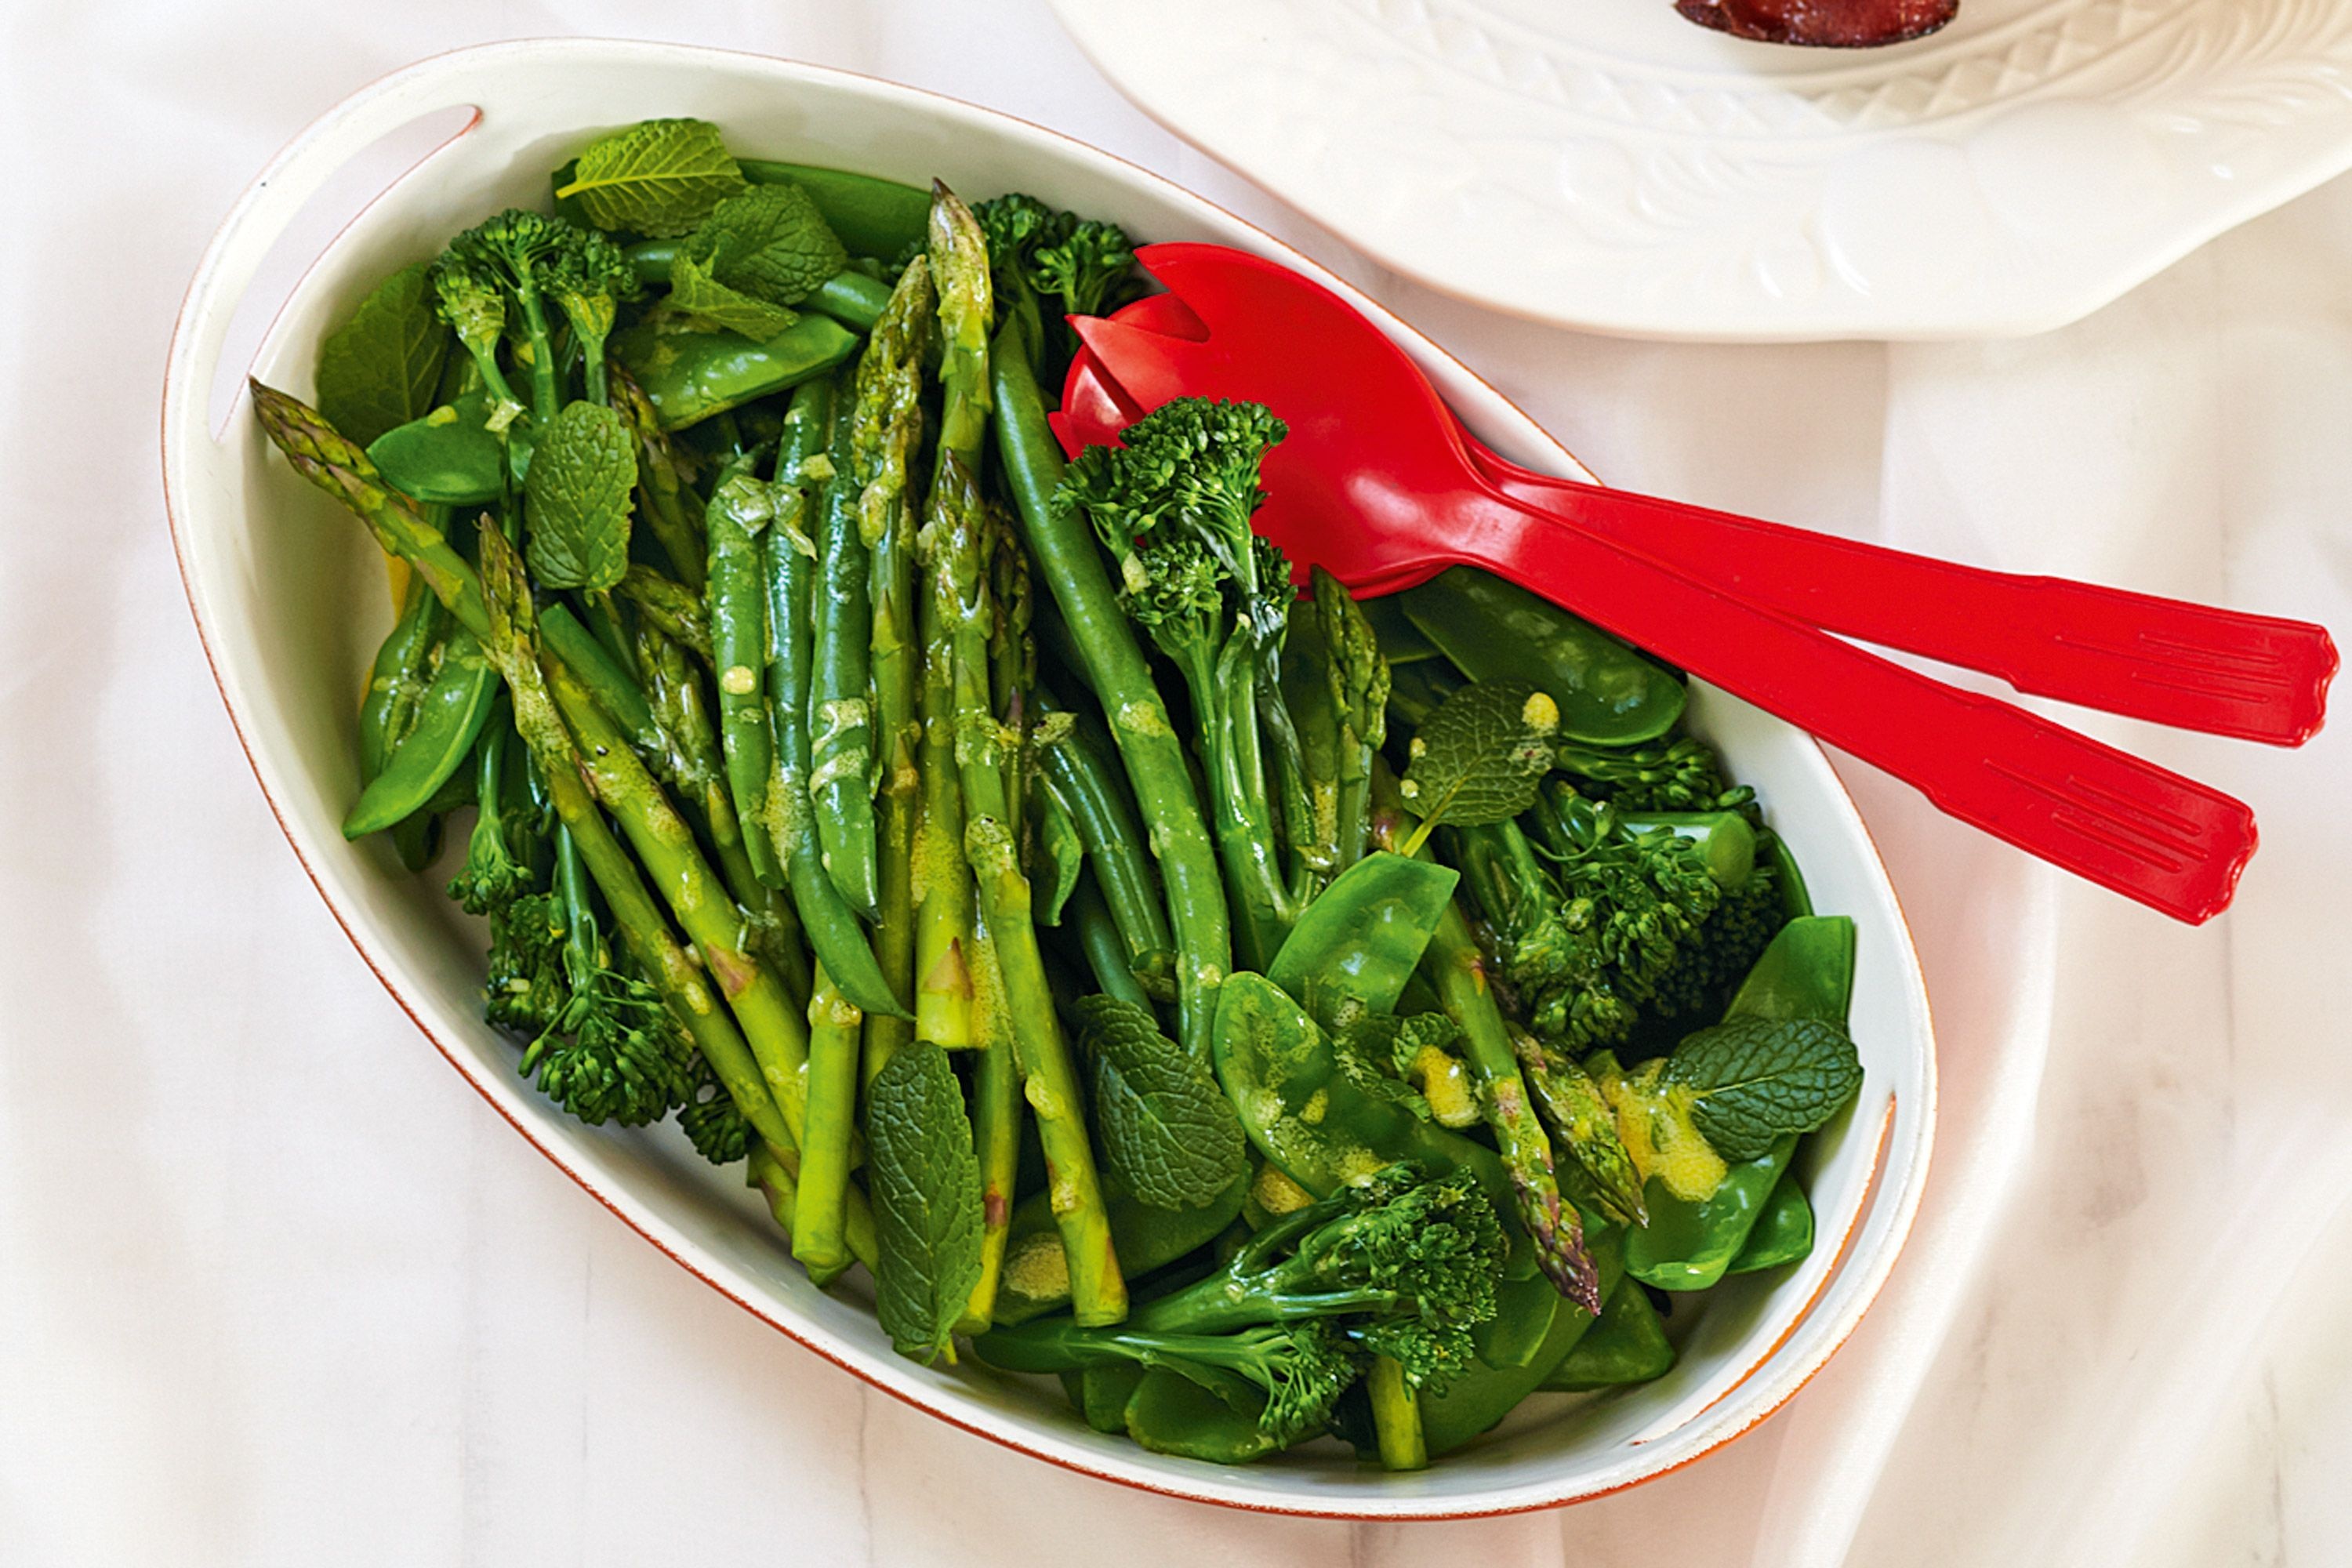 Steamed greens delight, Fresh flavors, Herbal aroma, Healthy side dish, 3000x2000 HD Desktop